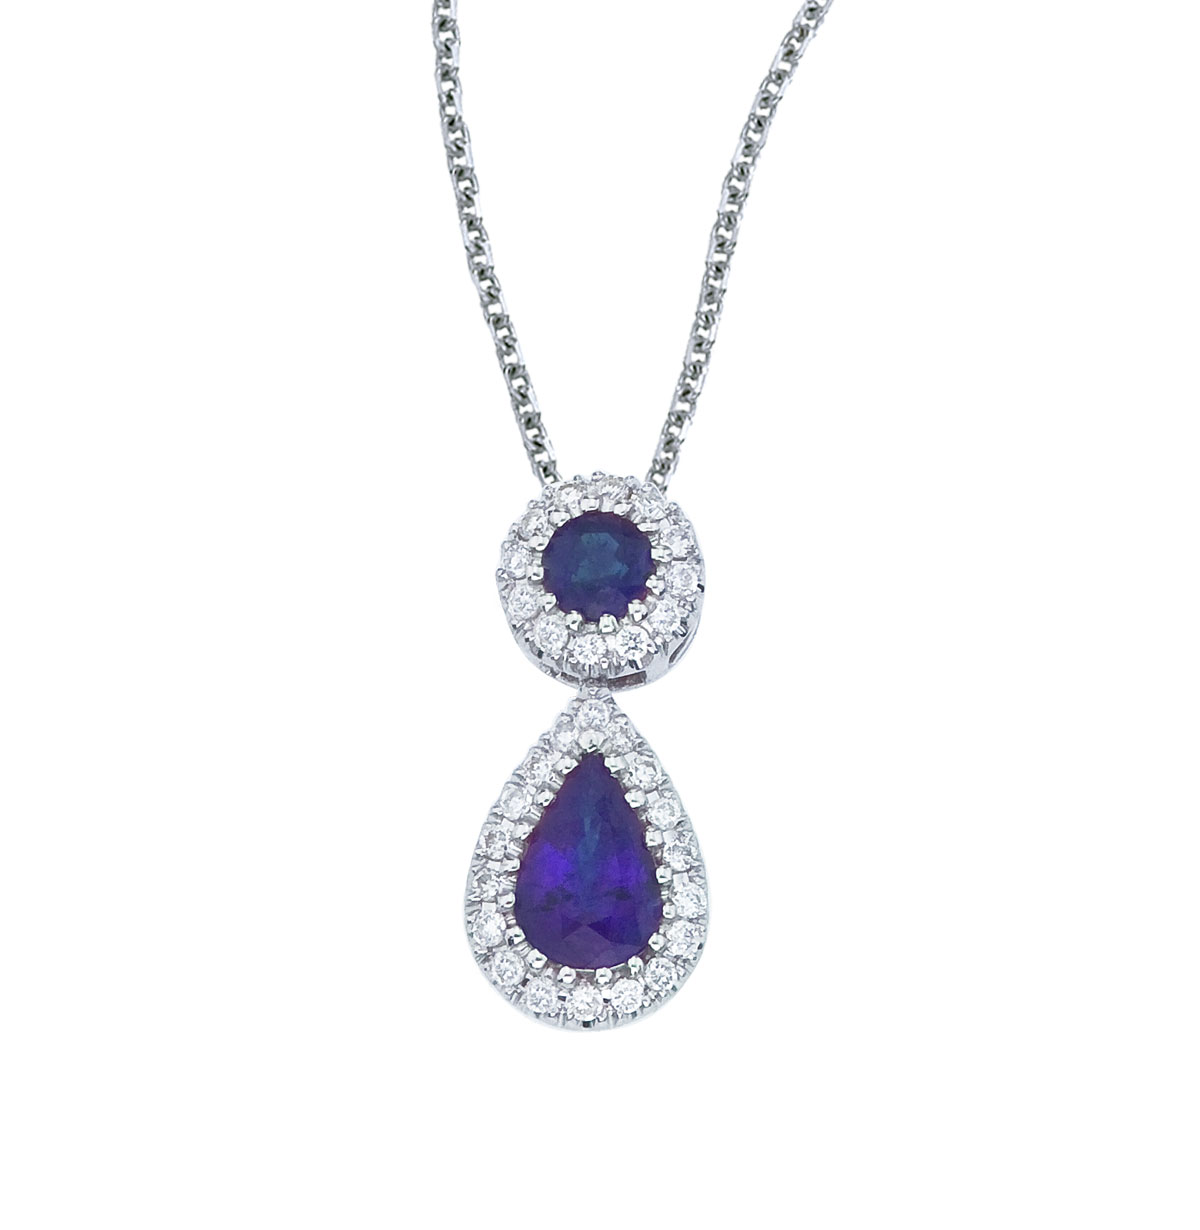 JCX2568: This beautiful 14k white gold pendant features a 6x4 mm sapphire dangling from a 2.5 mm round sapphire  all surrounded by .12 carats of shimmering diamonds.